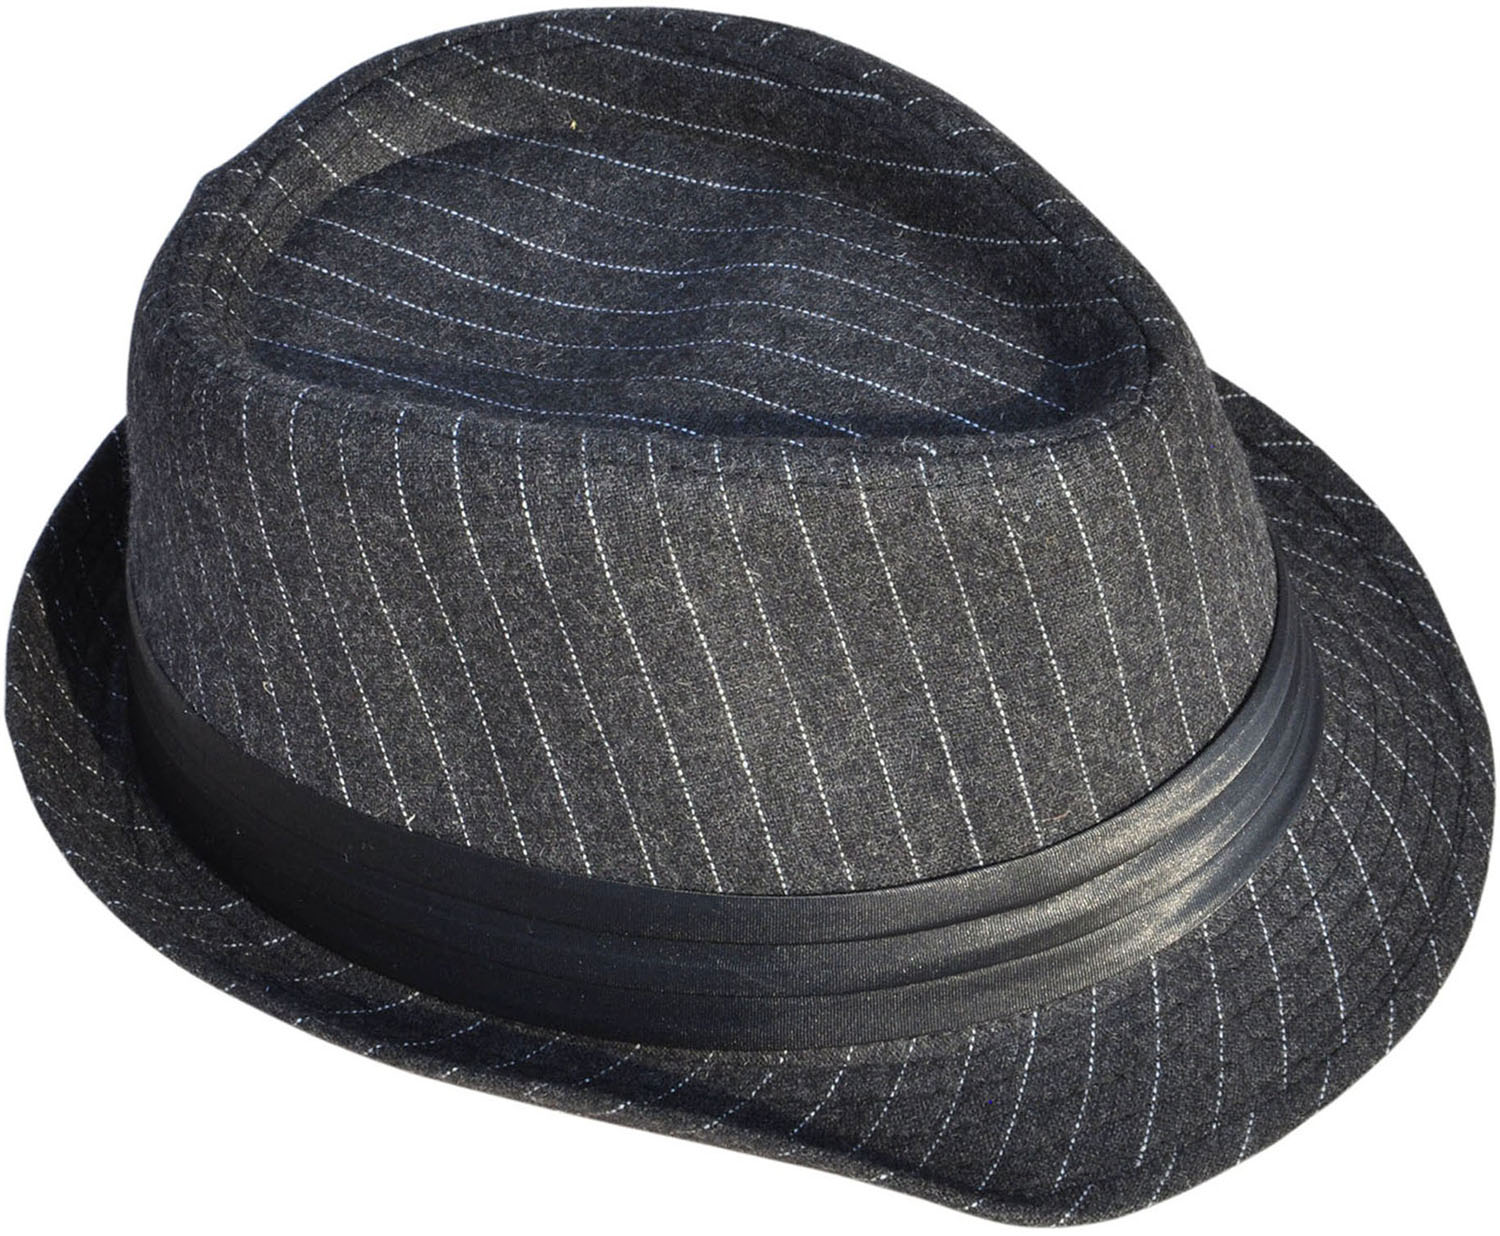 Simplicity Unisex Structured Gangster Trilby Wool Fedora Hat, 3075_Charcoal Gy - image 3 of 4